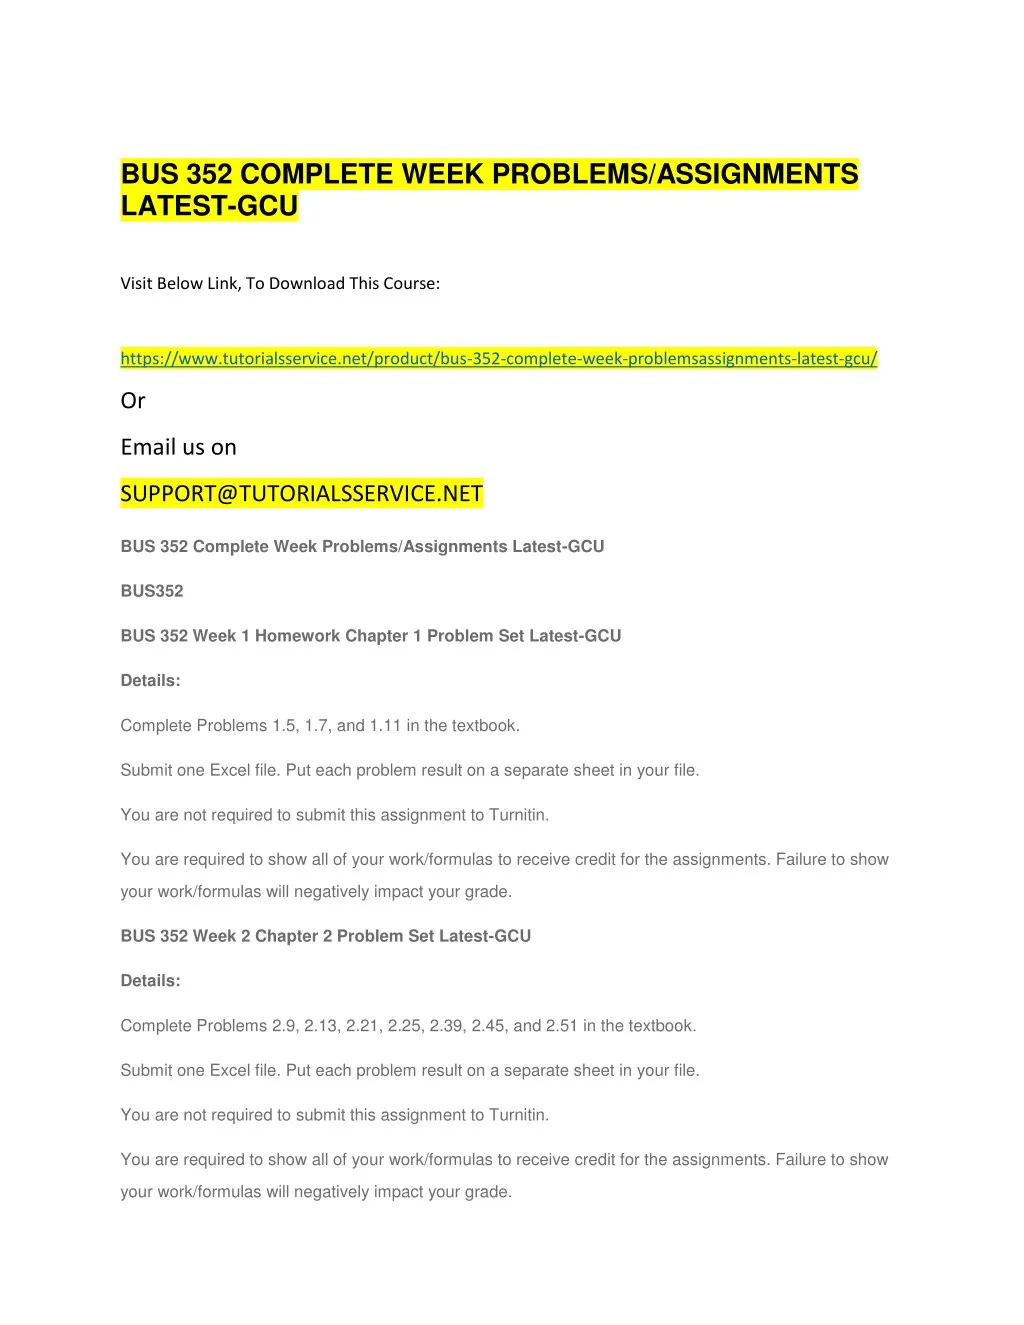 bus 352 complete week problems assignments latest